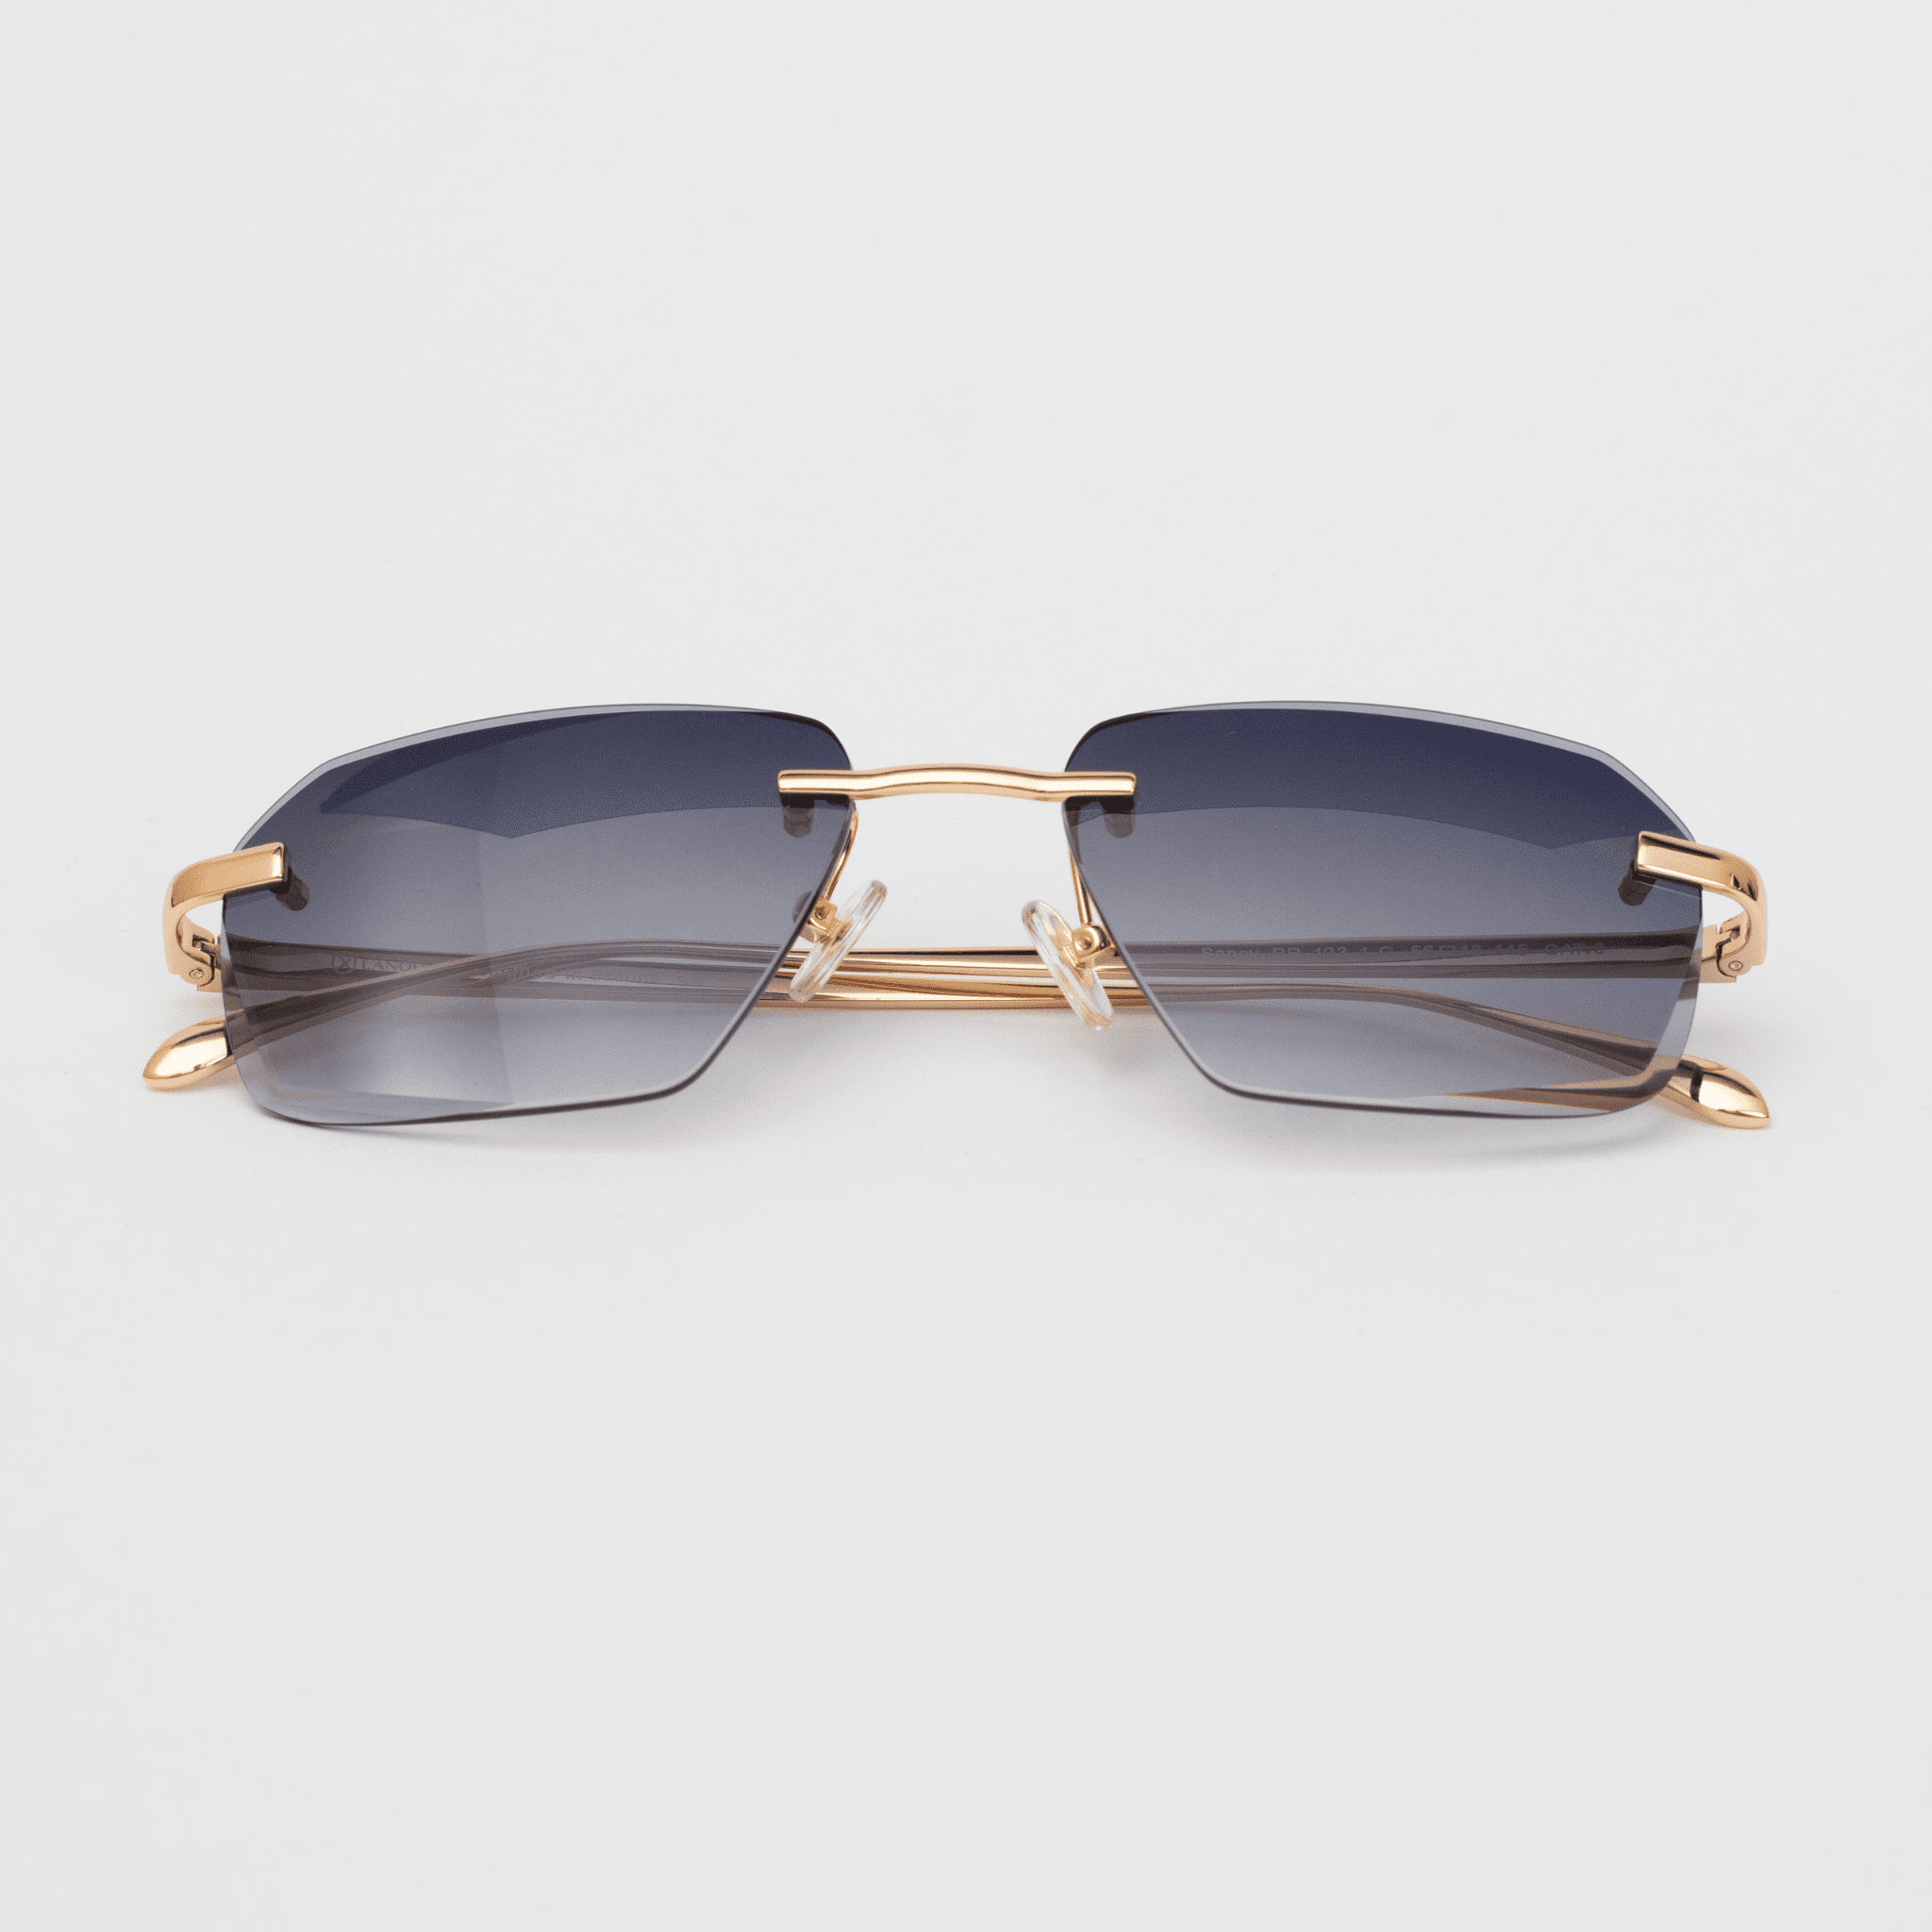 "Model Sancy sunglasses featuring a luxurious grey diamond-cut, rimless design with 18K gold detailing on the hinges and nose bridge, presenting a gradient blue tint, against a white backdrop.